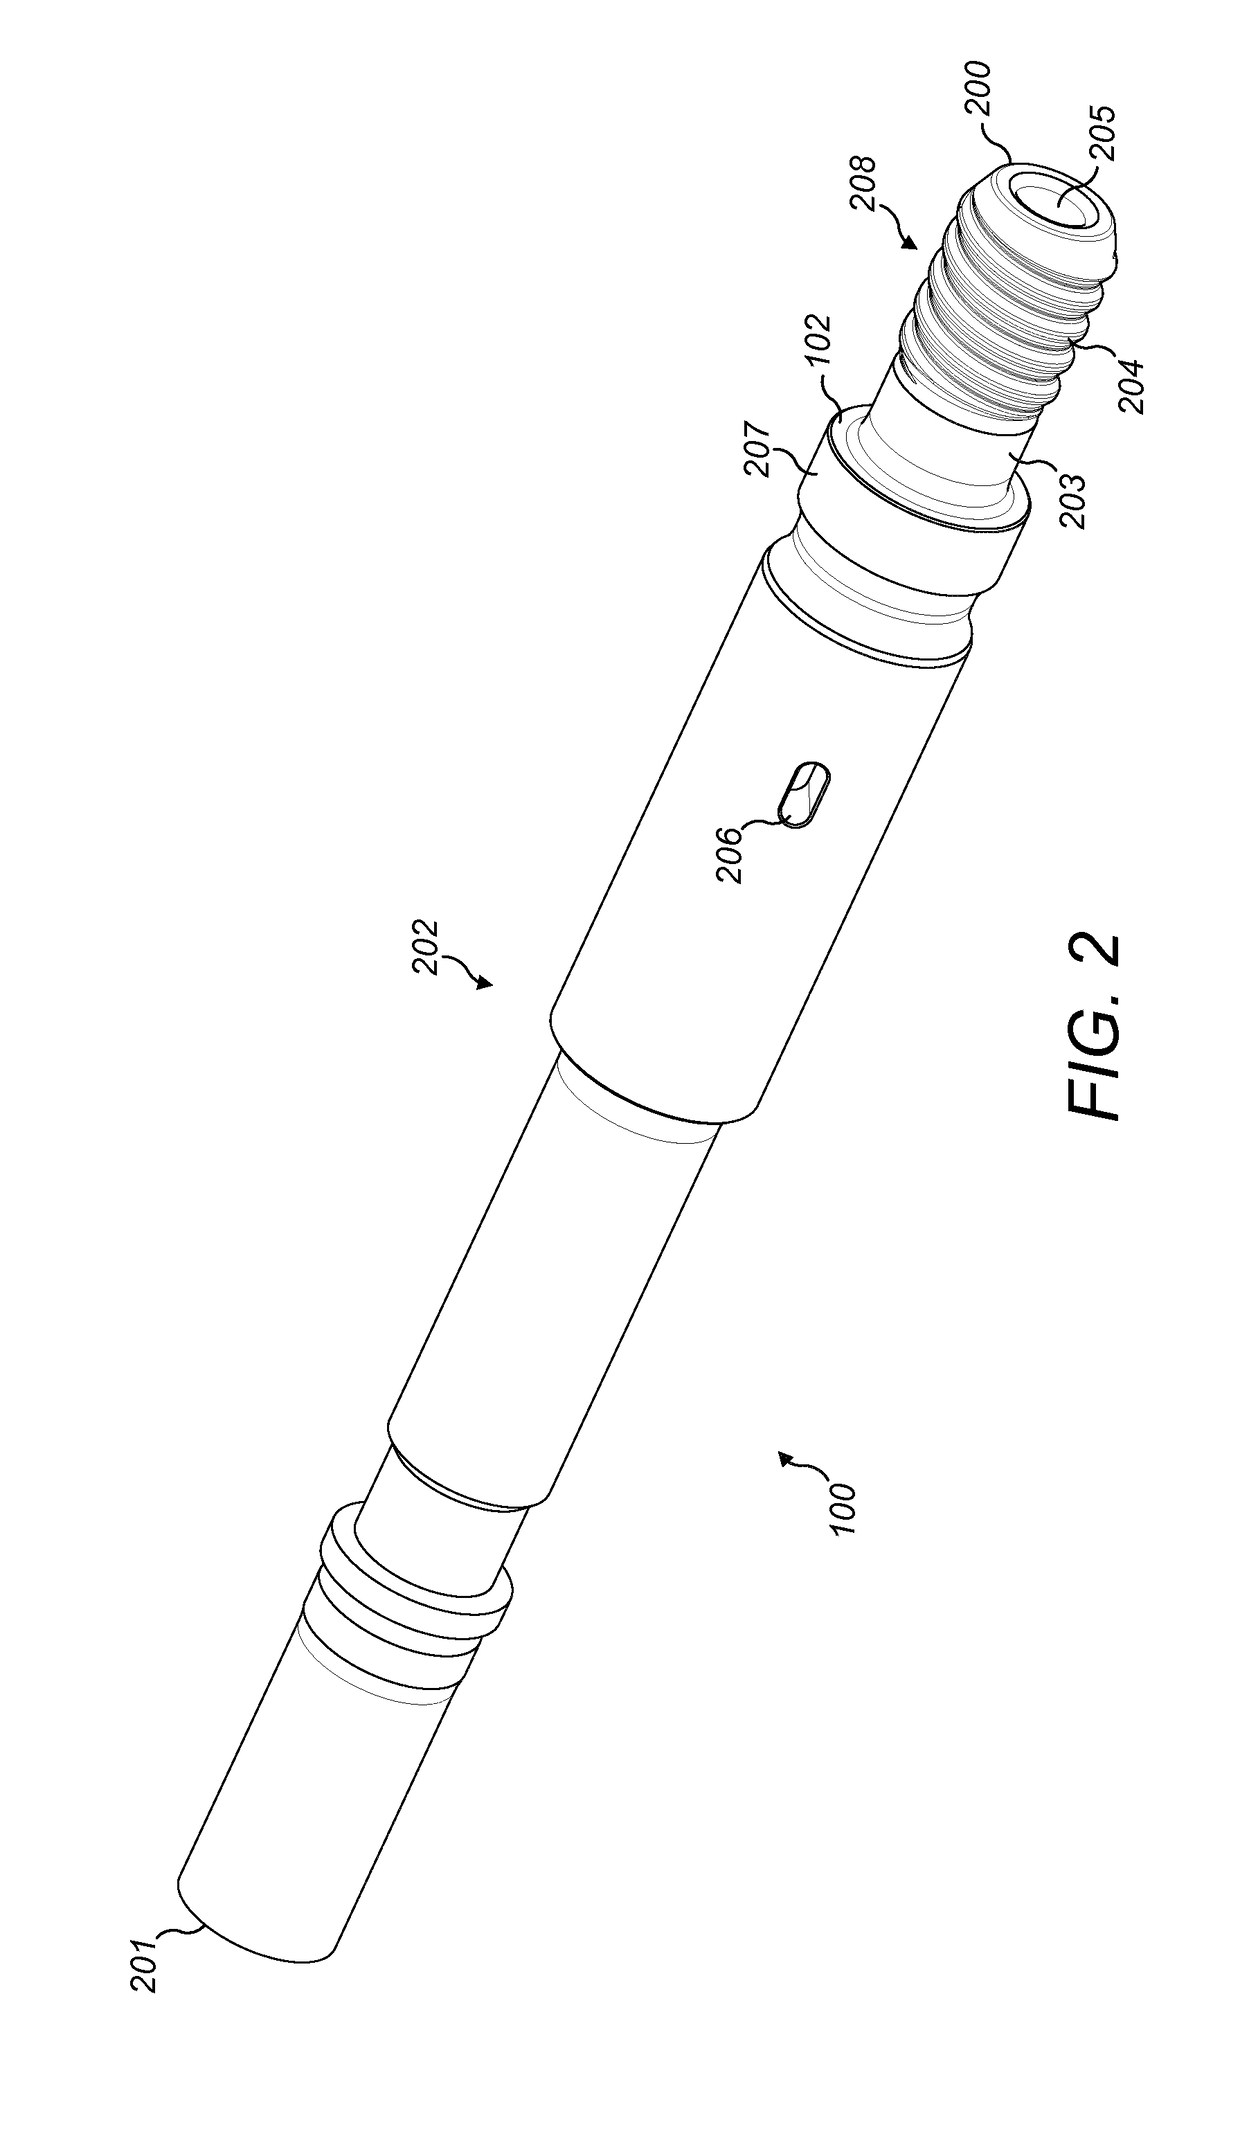 Drill rod or adaptor with strengthened spigot coupling